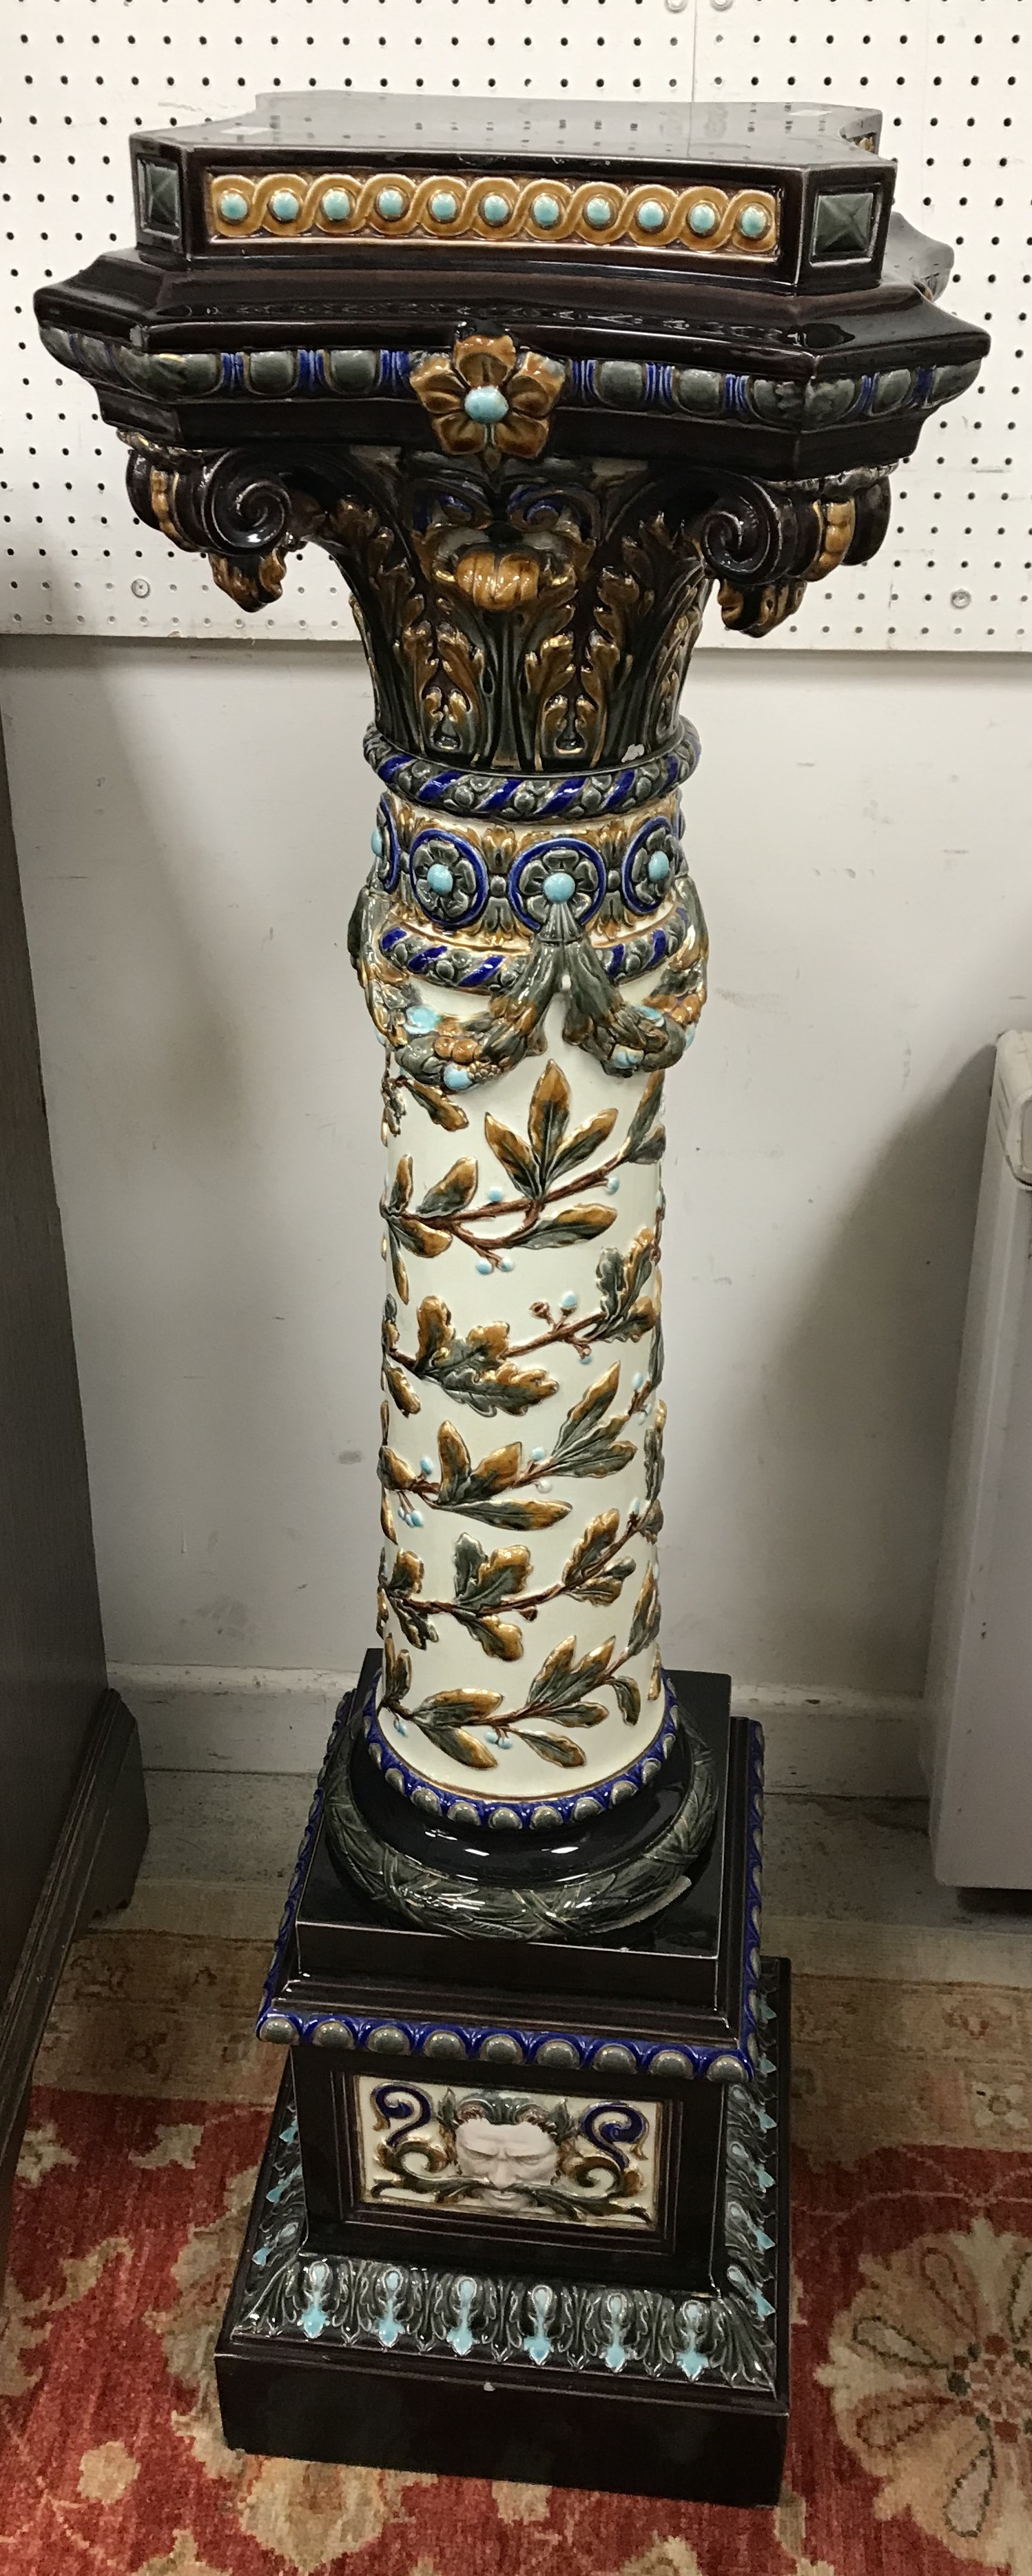 A circa 1900 Swedish majolica urn stand by Rörstand with all over relief work decoration on a